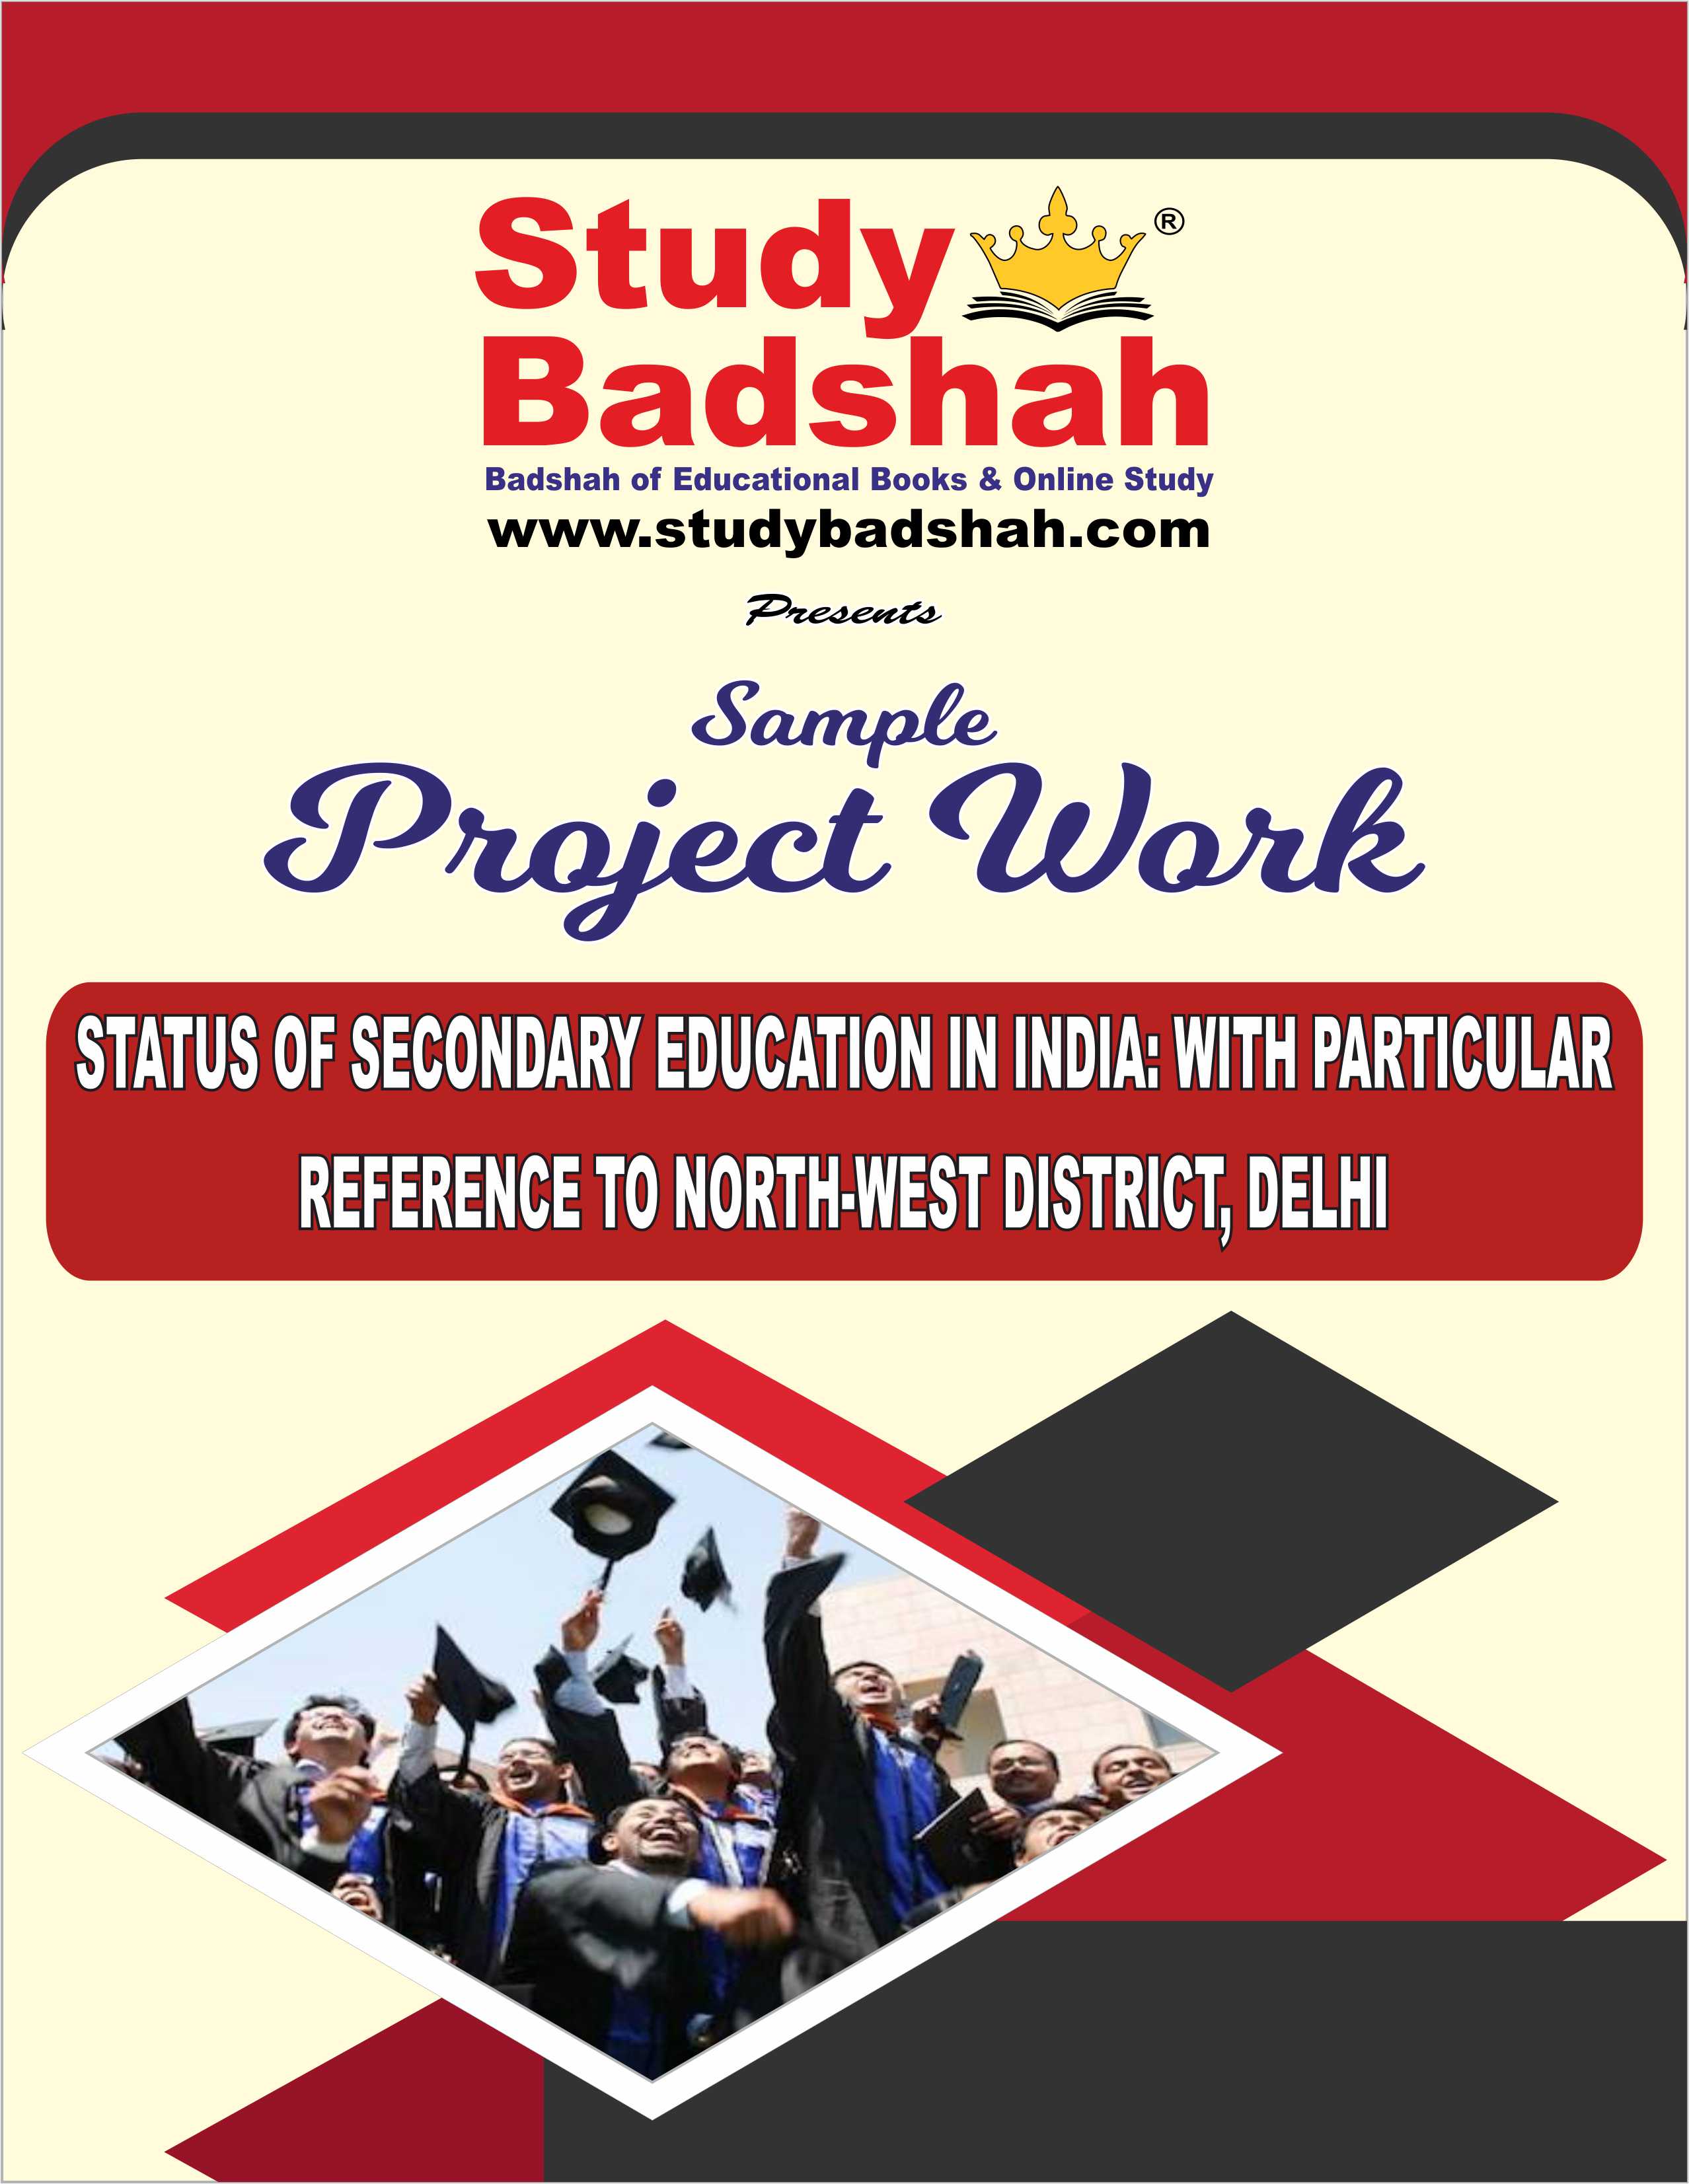 STATUS OF SECONDARY EDUCATION IN INDIA WITH PARTICULAR REFERENCE TO NORTH-WEST DISTRICT, DELHI